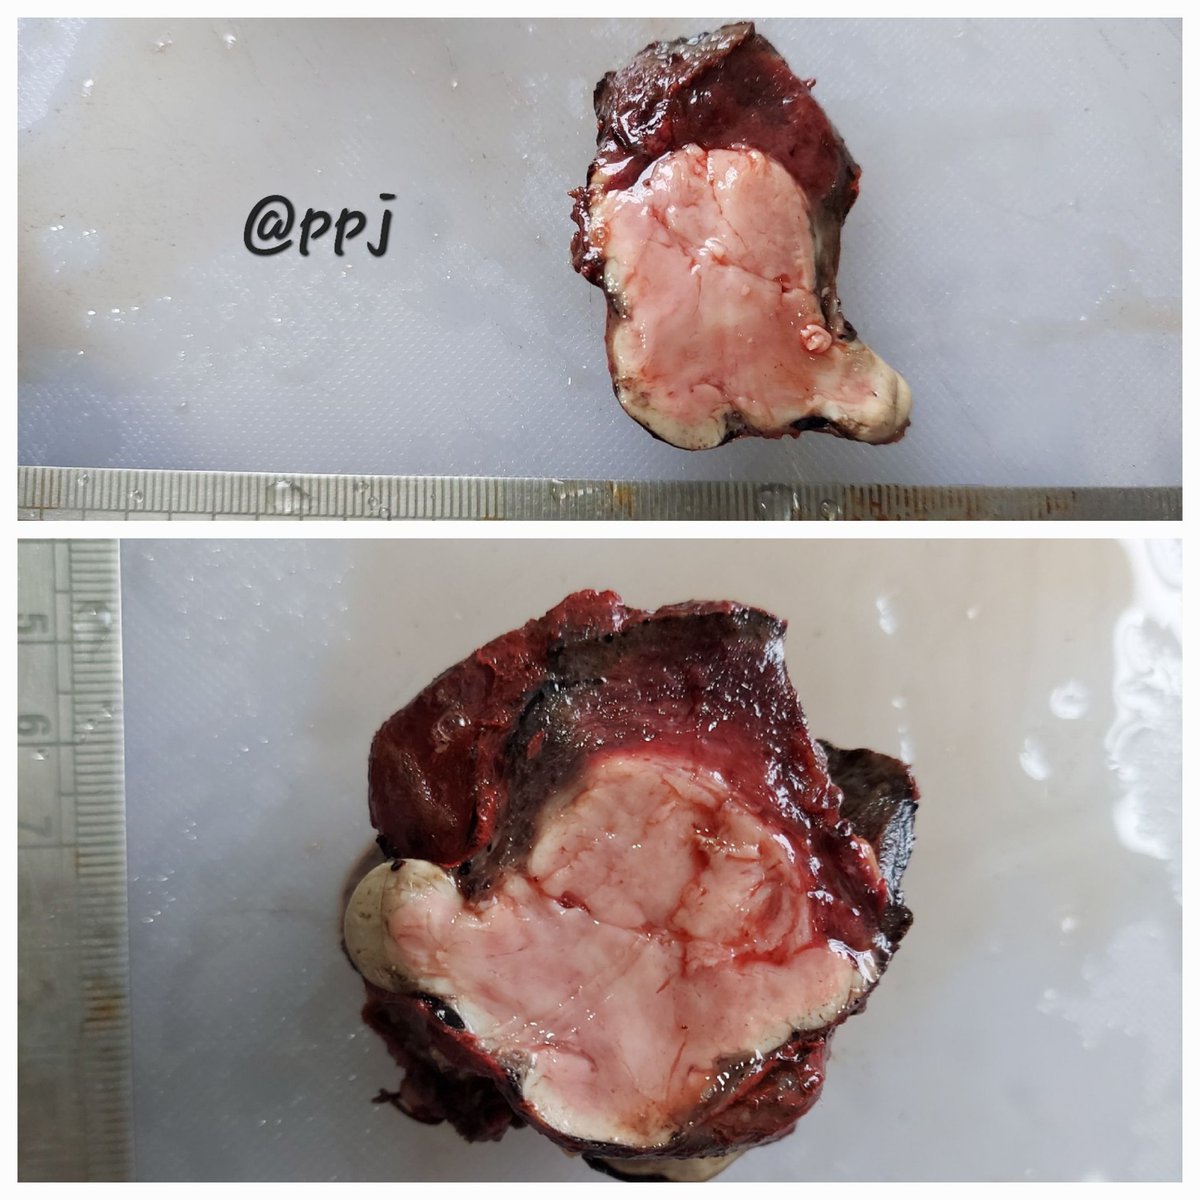 Another #OneImageDiagnosis
#macropath #grosspath #grossognosis #thyroid #endopath